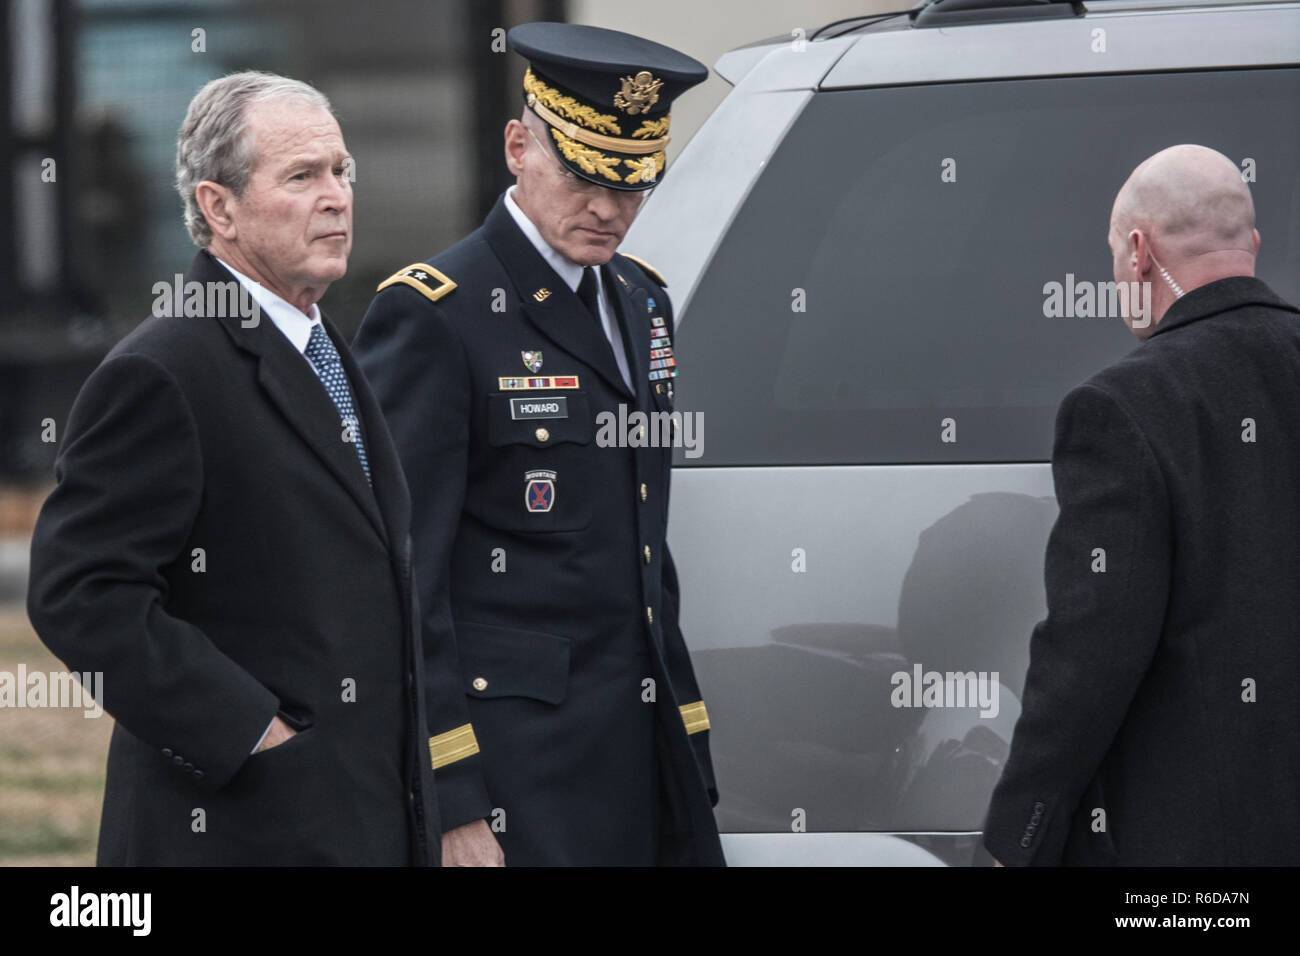 Washington DC, USA. 5th December, 2018. 43rd President George W. Bush at his father President George H.W. Bush State Funeral. Photo Credit: Rudy K / Alamy Live News Stock Photo